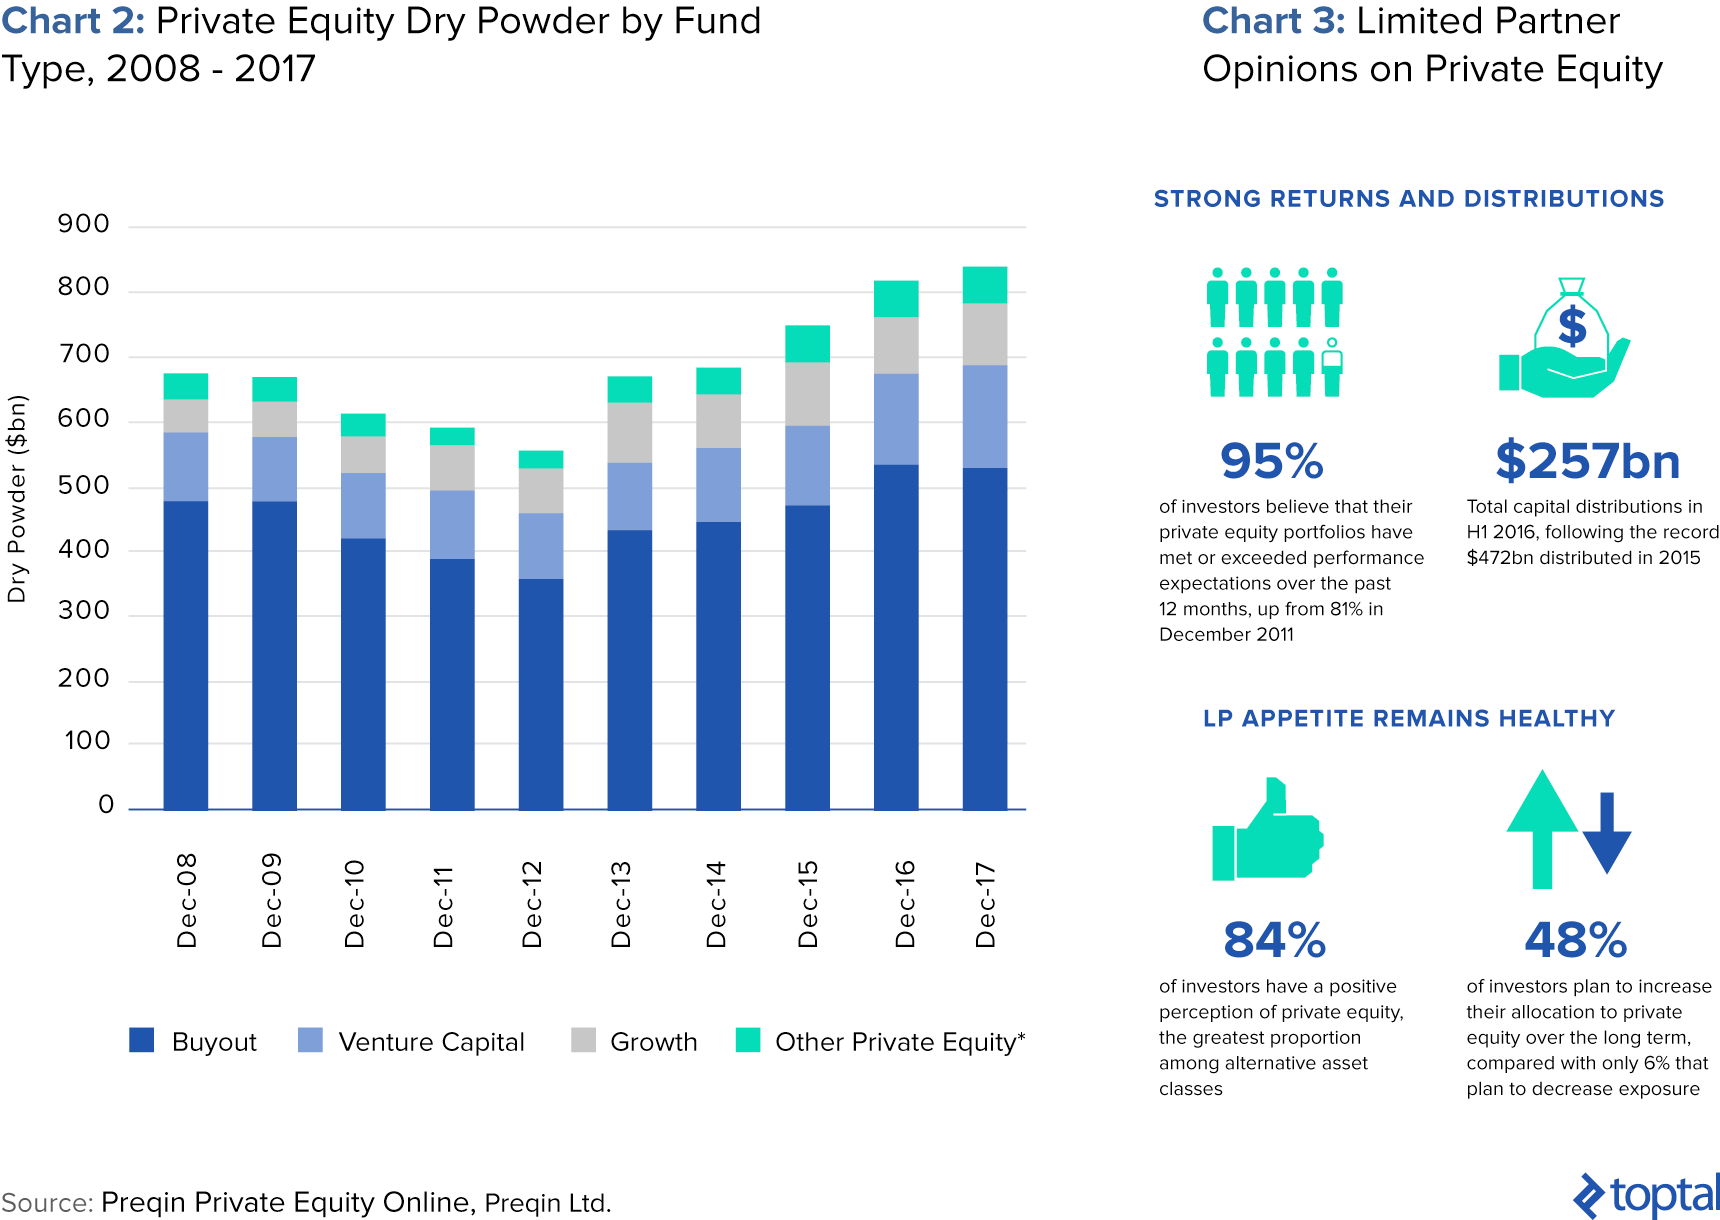 Private Equity Dry Powder by Fund Type and Limited Partners Opinion on Private Equity